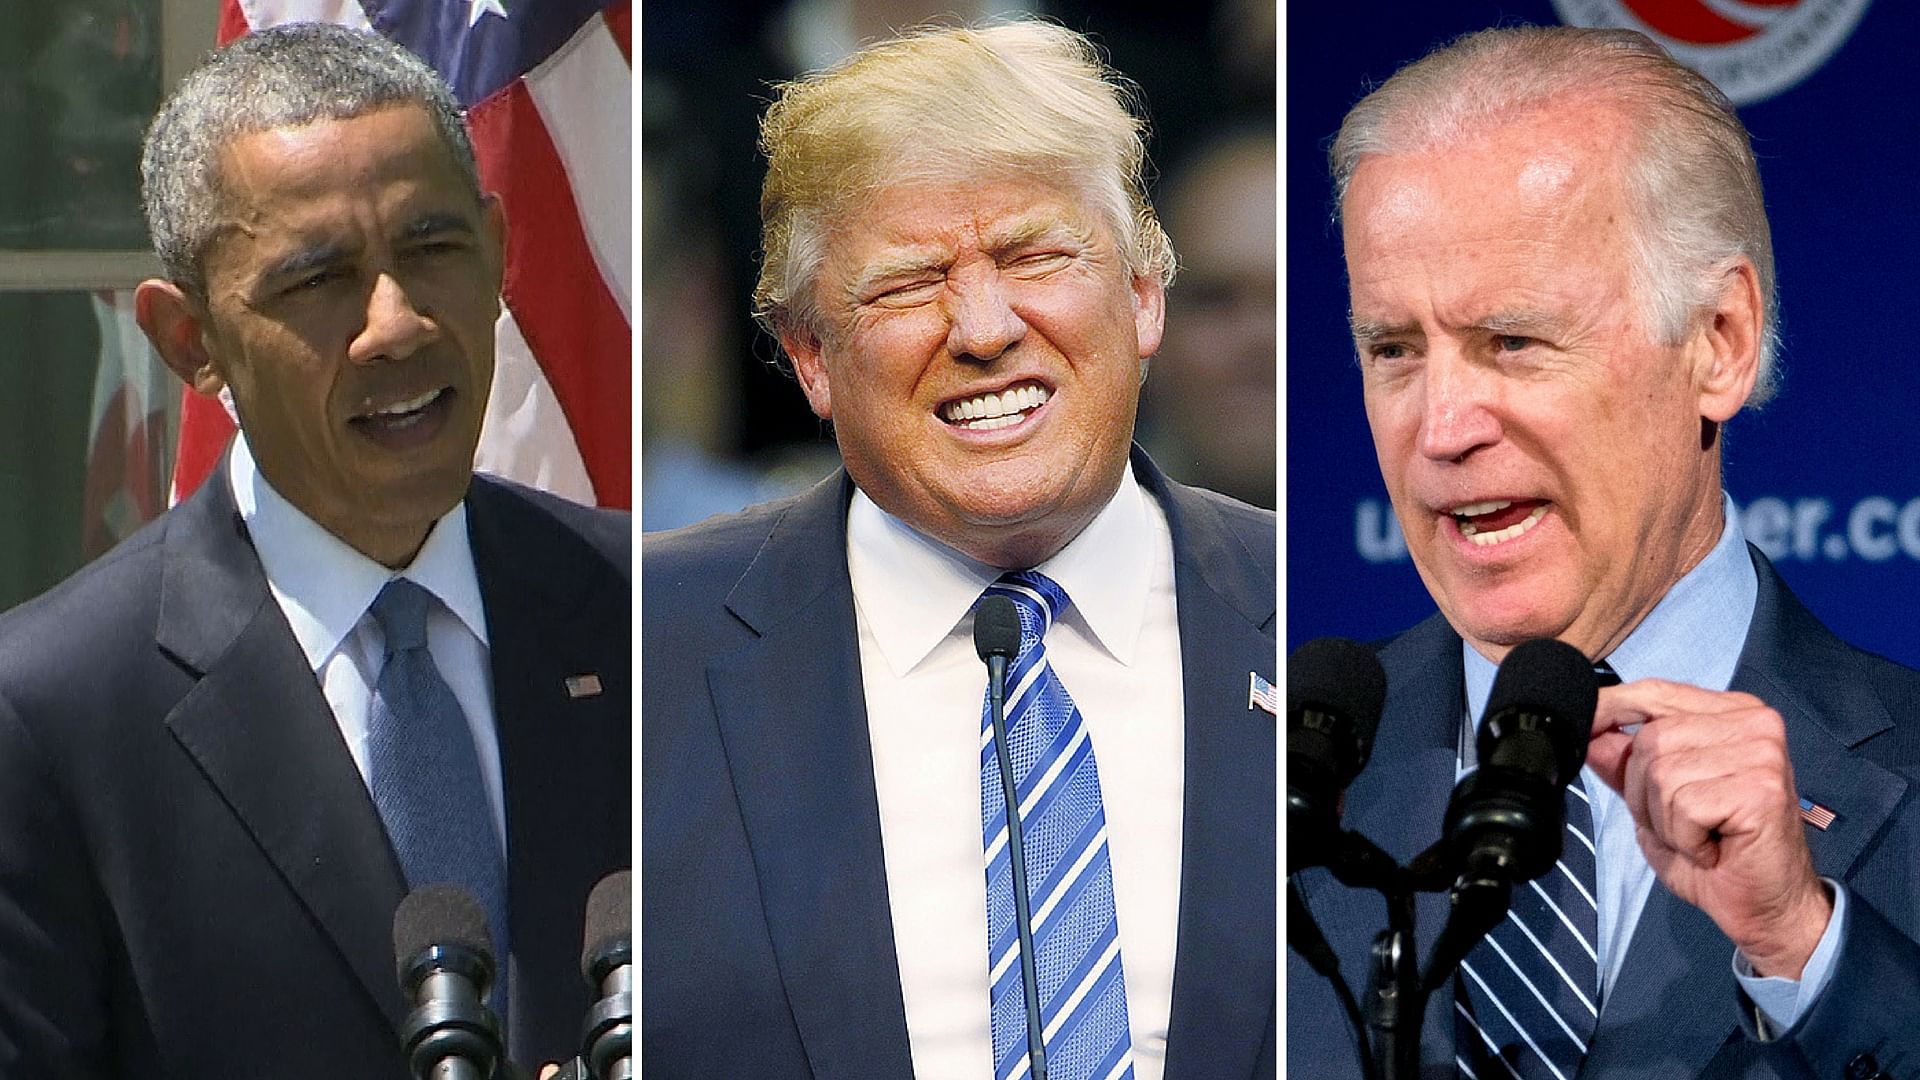 From left to right: Obama, Trump and Biden. (Photo: AP/Reuters)